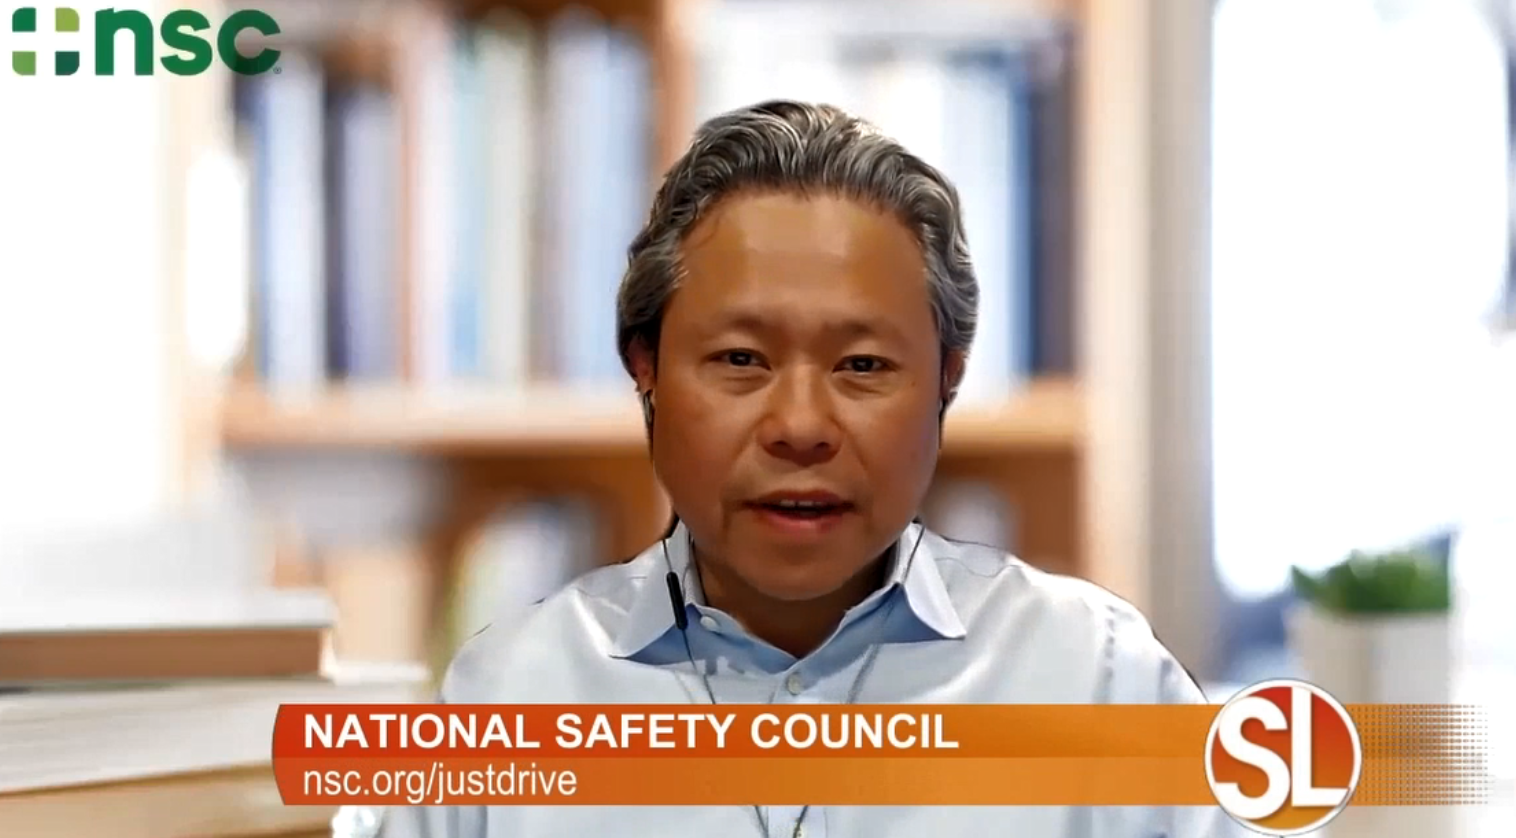 Man with text "National Safety Council"